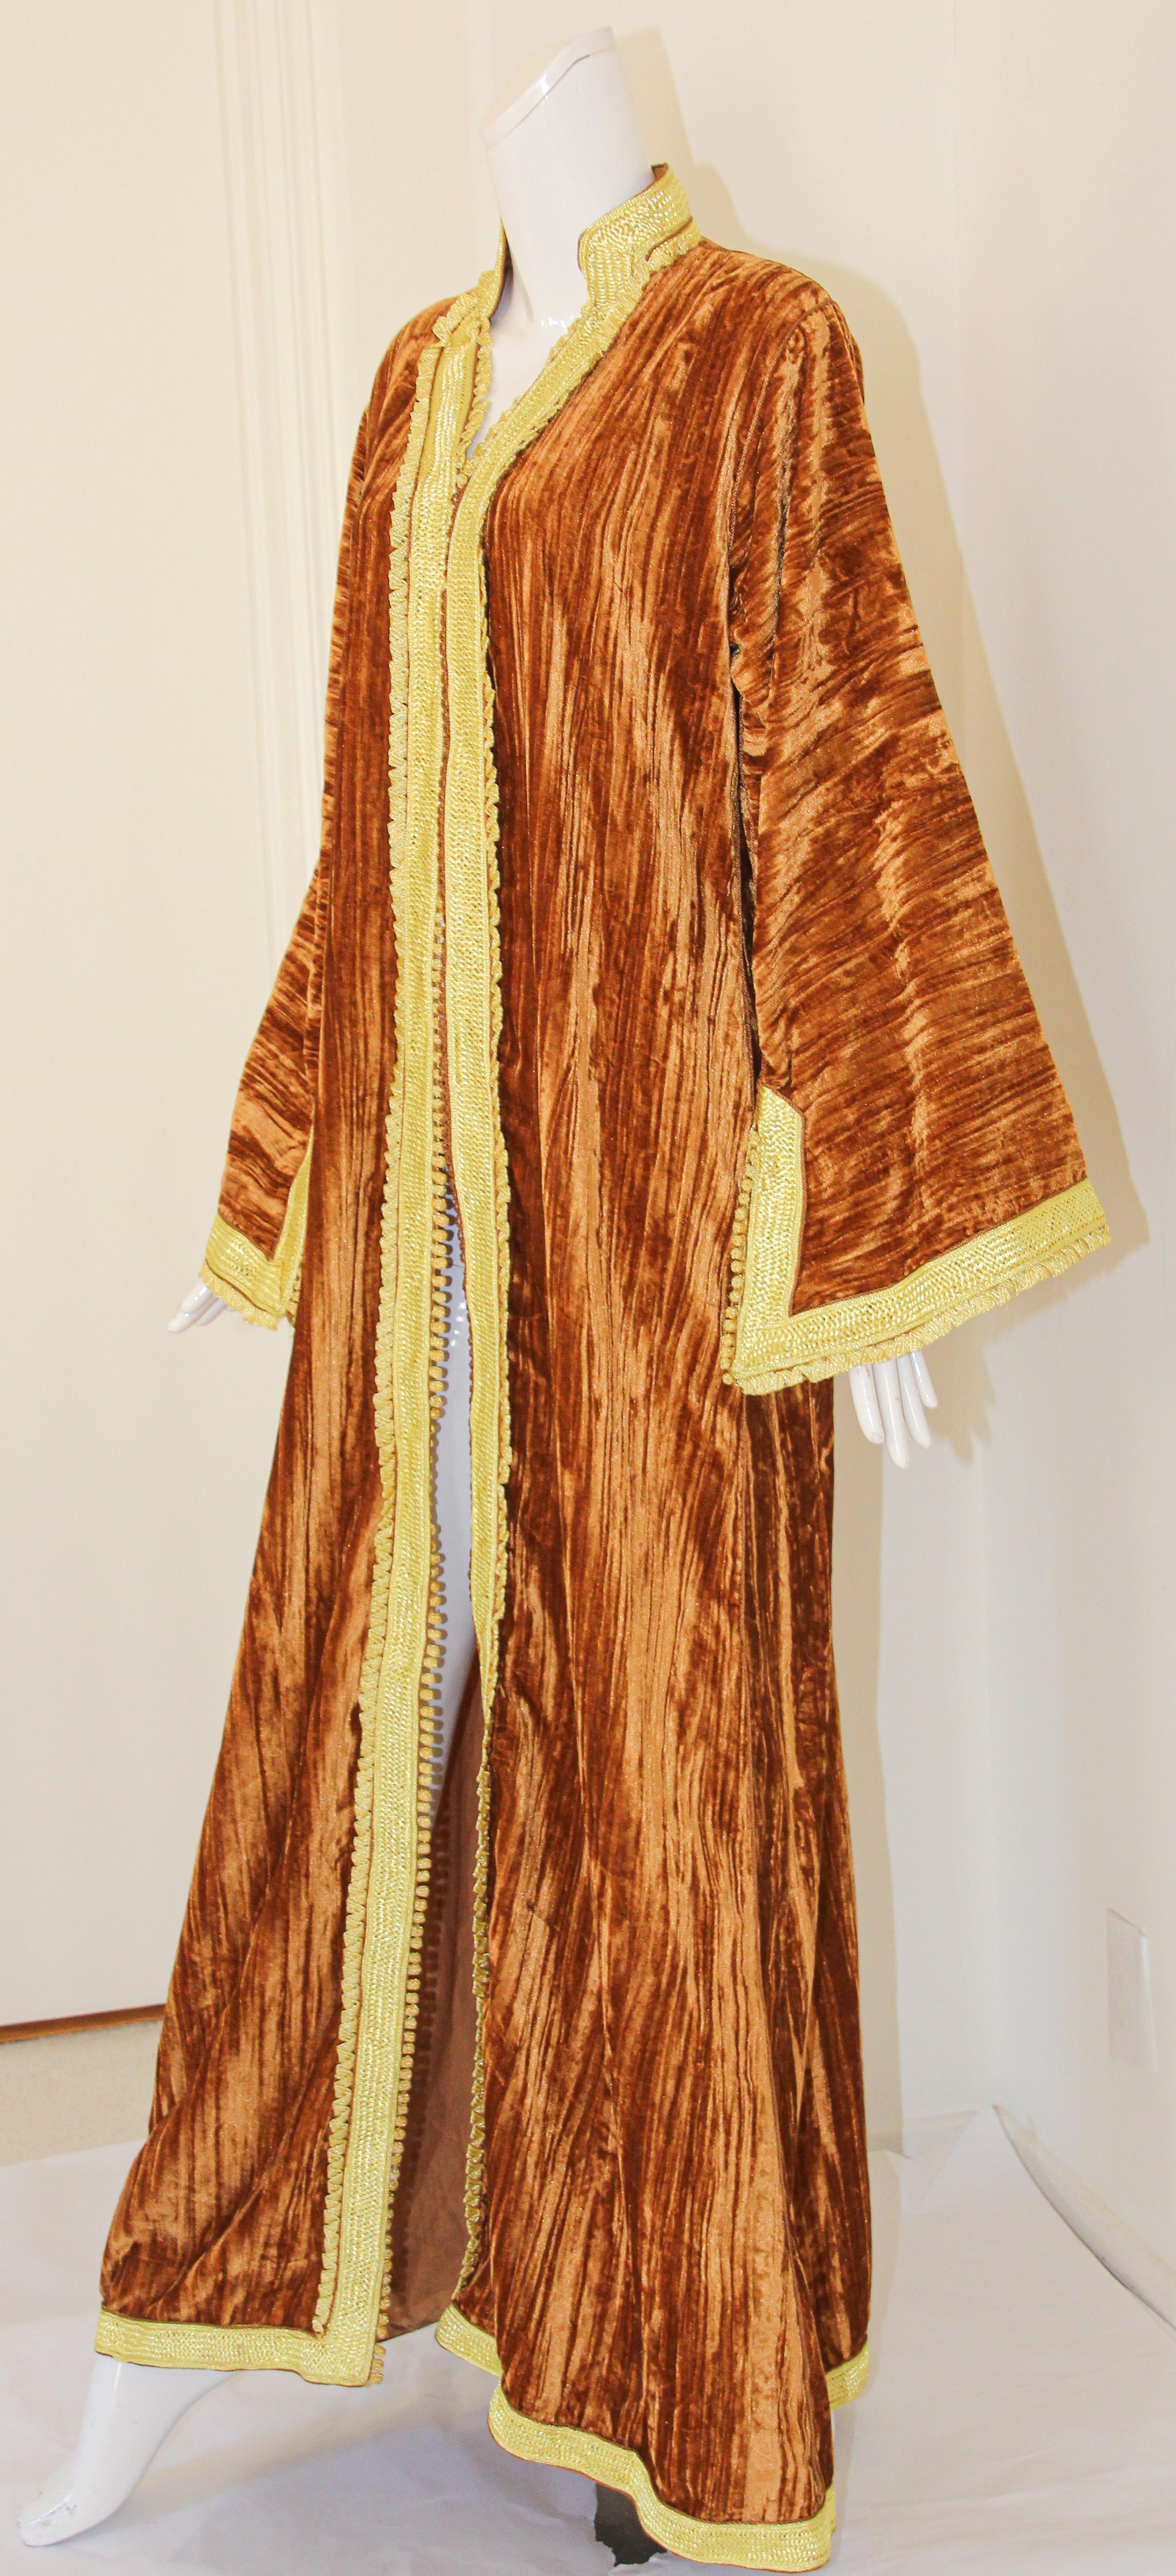 Amazing vintage handmade caftan, caramel color crushed silk velvet heavily with gold rim threads. Circa 1960's
The honey gold velvet kaftan is embroidered and embellished entirely by hand, super-luxe designer kaftan. 
One of a kind evening gown or